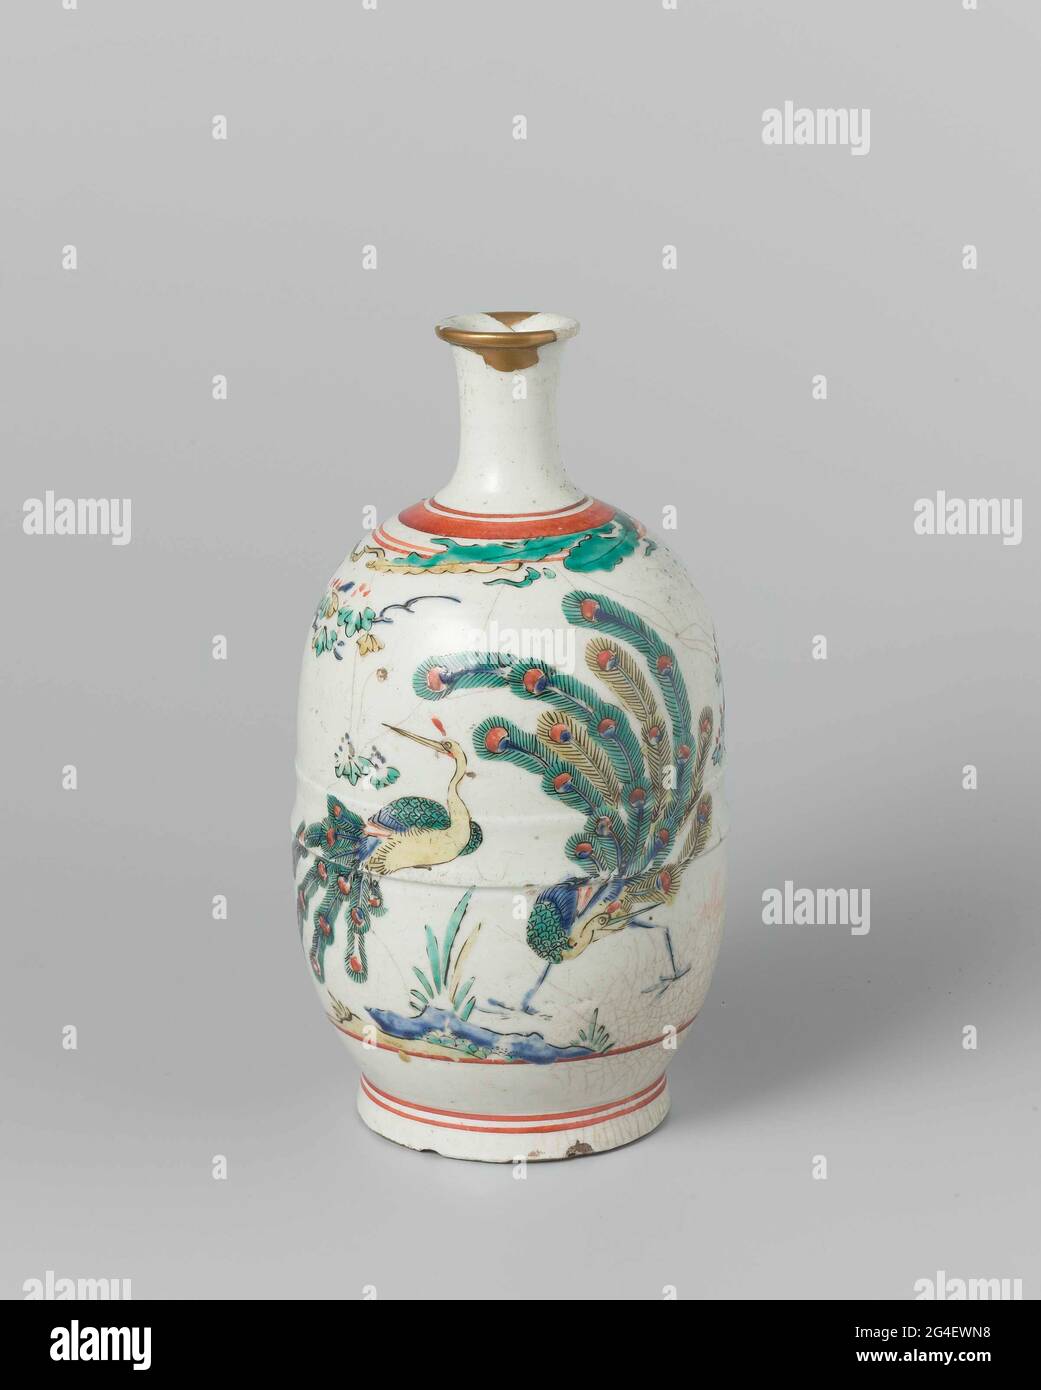 . Bottle (sakefles) of porcelain with a narrow, slightly spreading neck, painted on the glaze in blue, red, green, yellow and black. On the abdomen twice a peacock at a rock with a flowering plant. Leaves and red lines on the shoulder. Golden lacquer repair in the edge. Arita (Kakiemon-style). Stock Photo